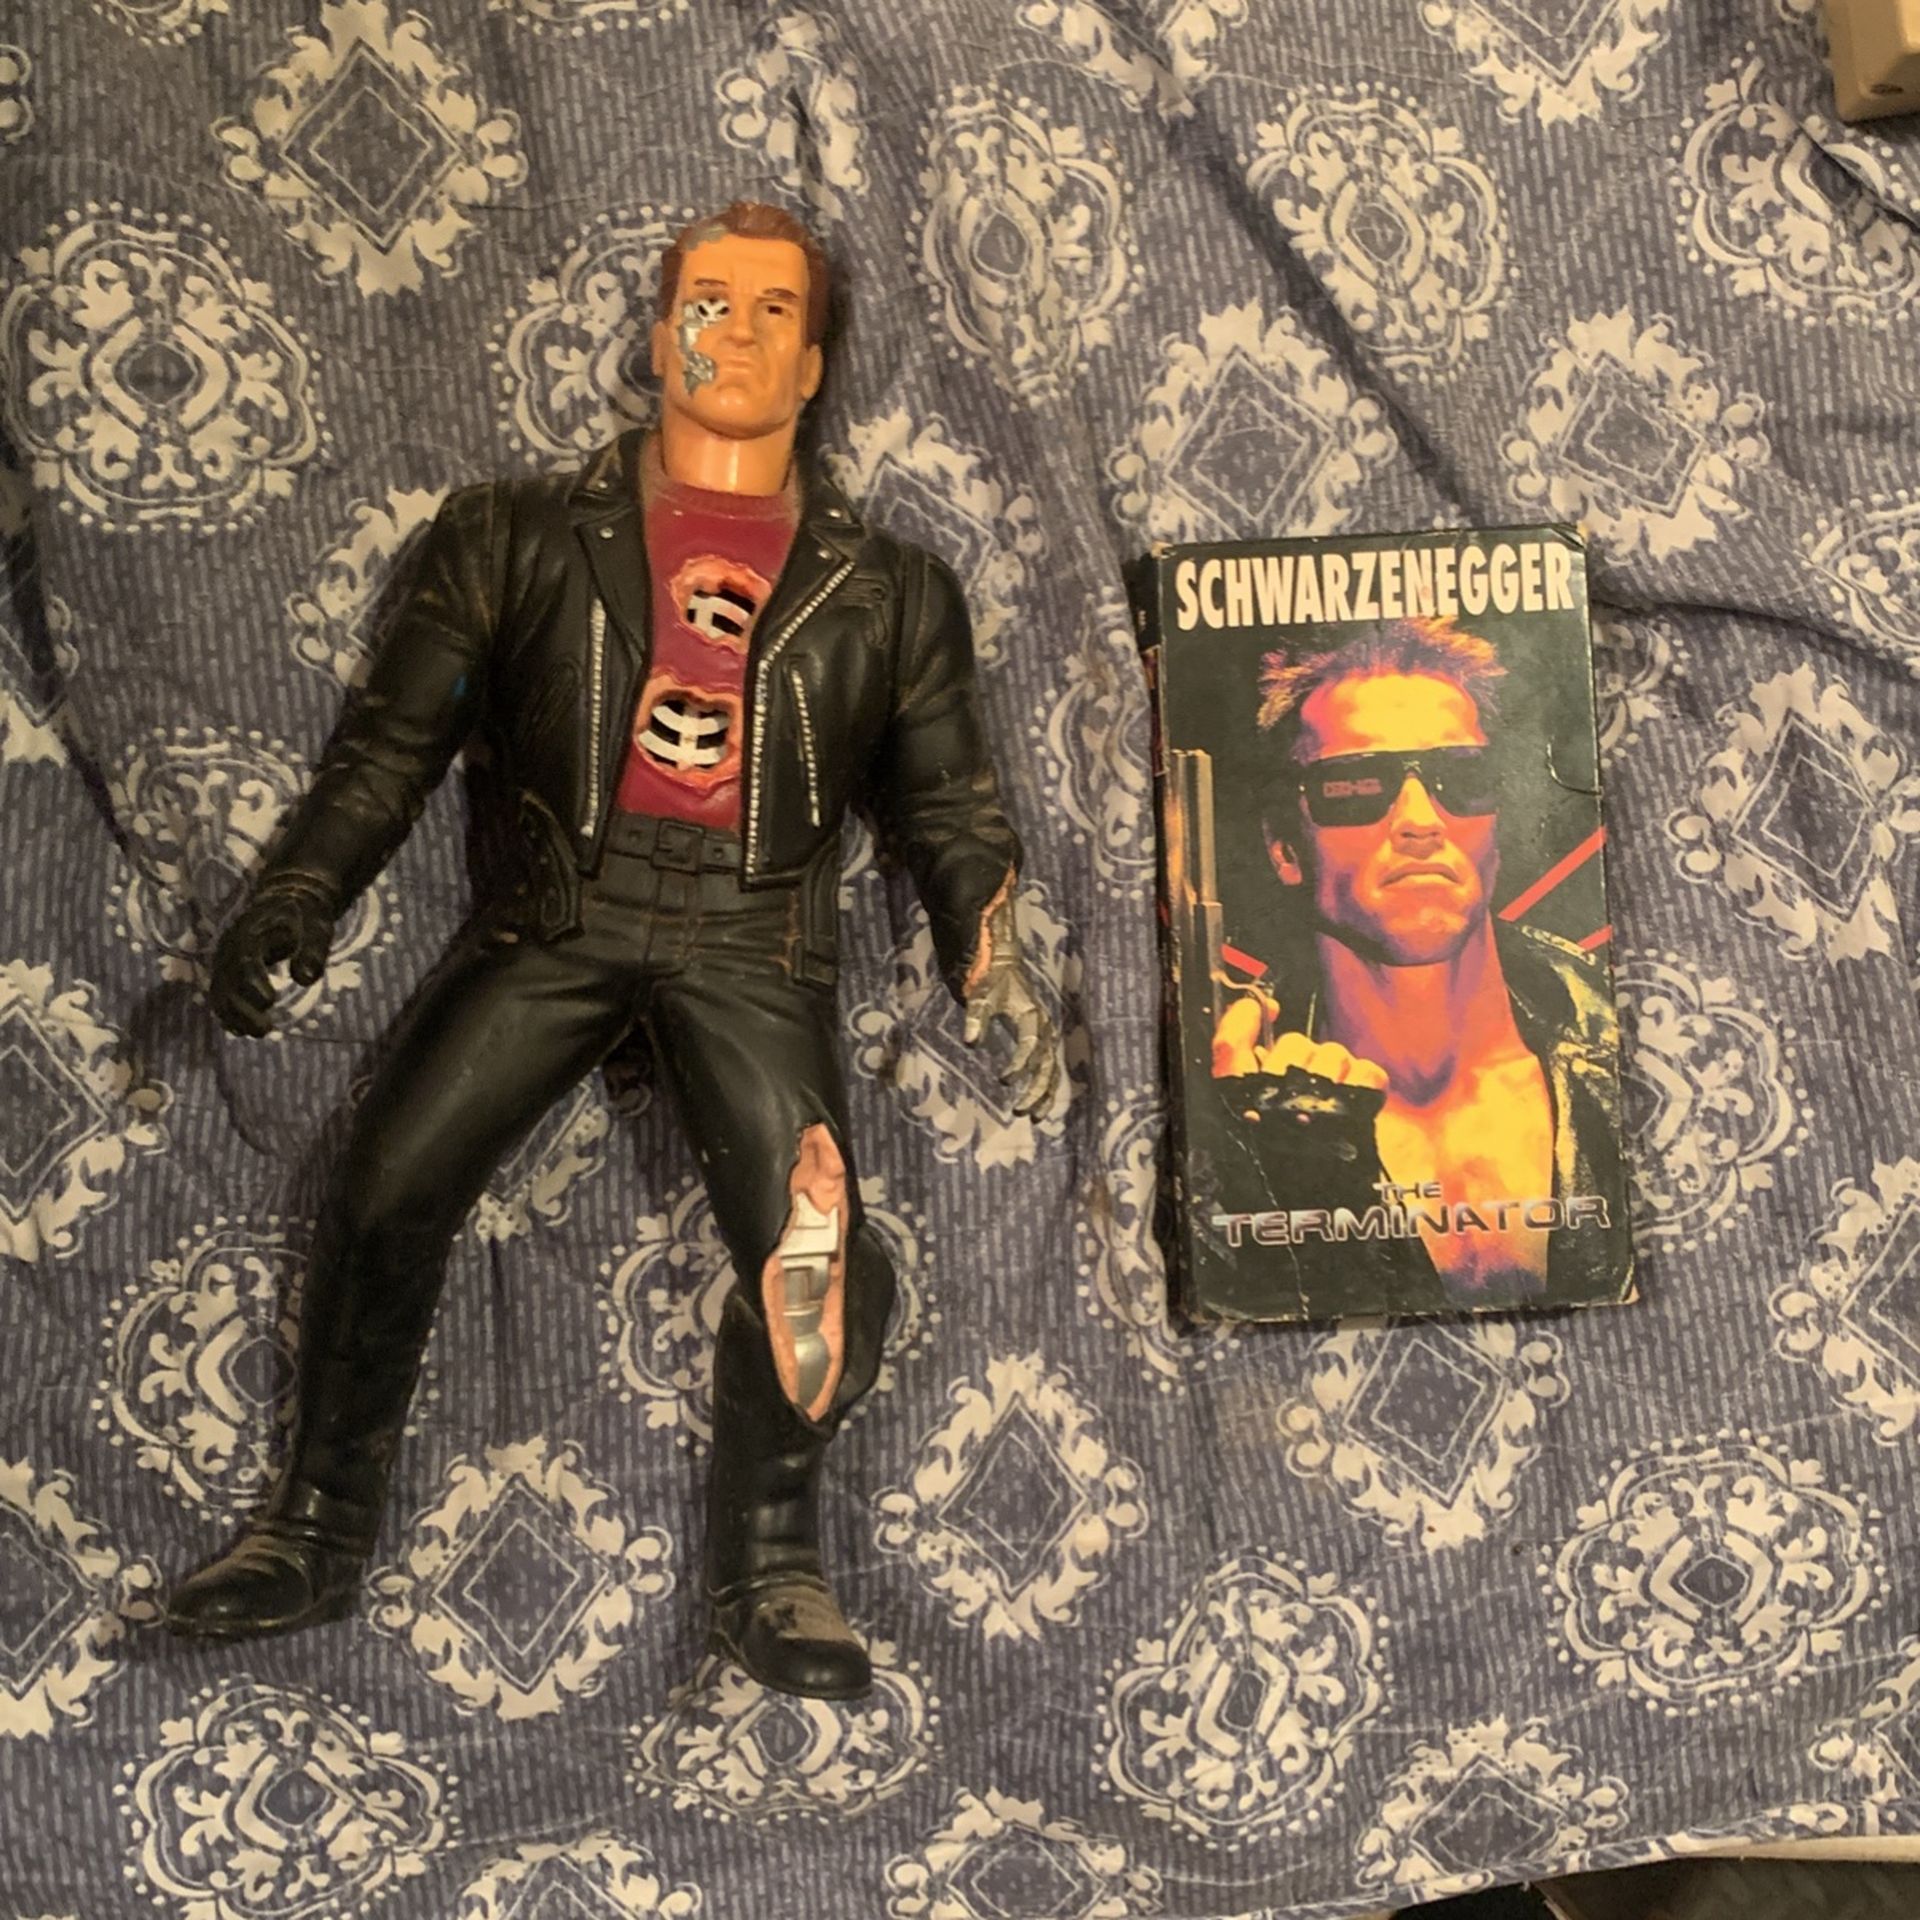 Original Terminator VHS And Action Figure From 1995